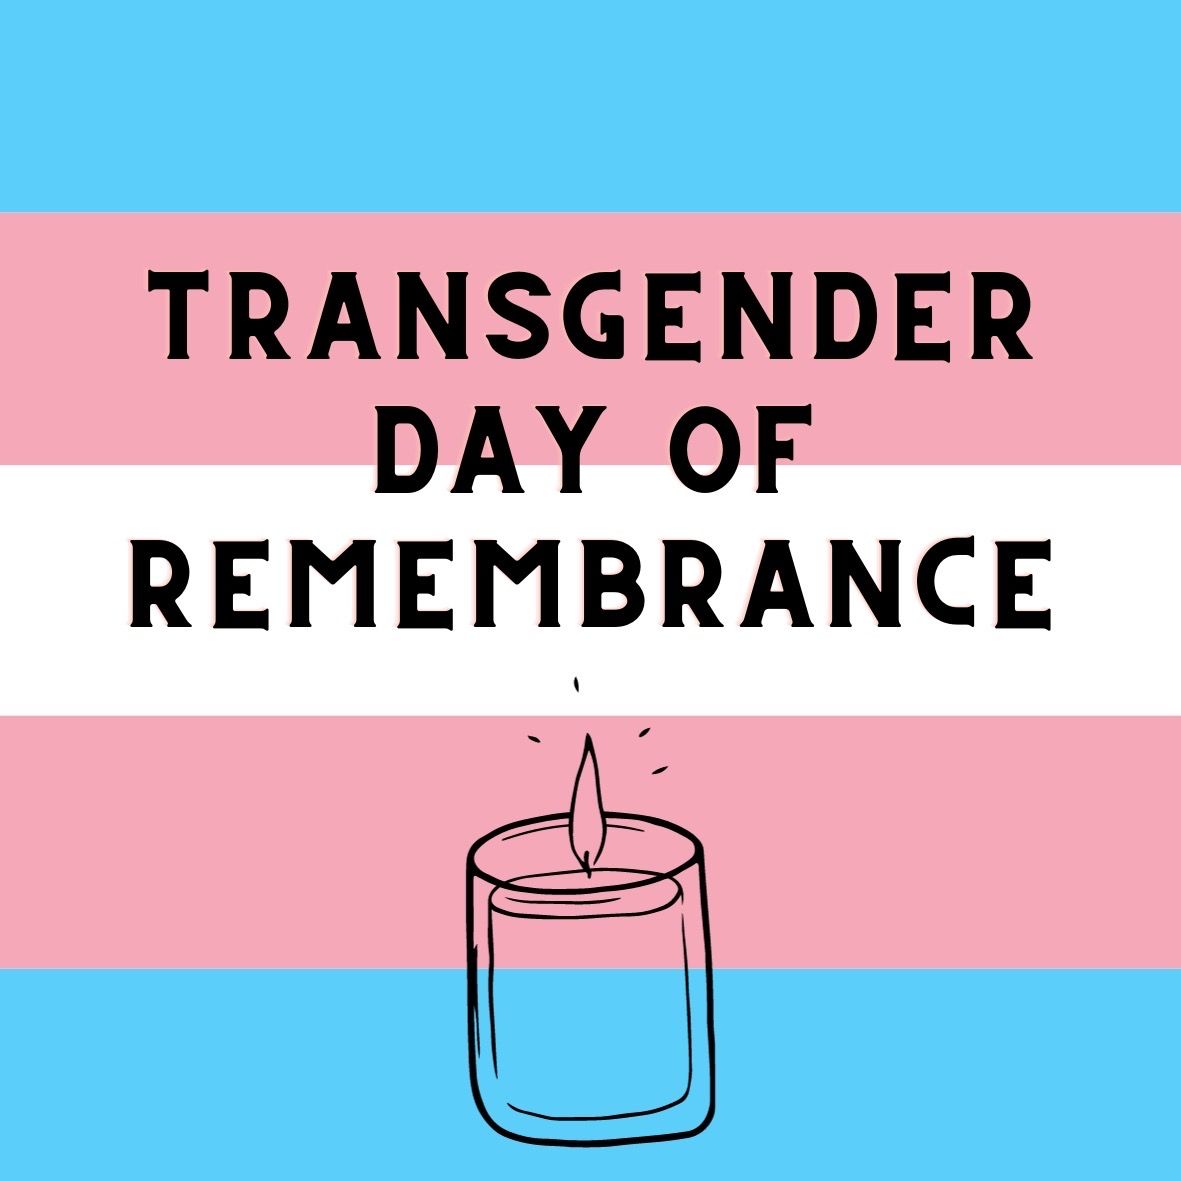 Today, we honor all transgender people who are no longer with us, lost to hate violence, suicide, and the immense hardships of systemic oppression. #transgender #transgenderdayofremembrance